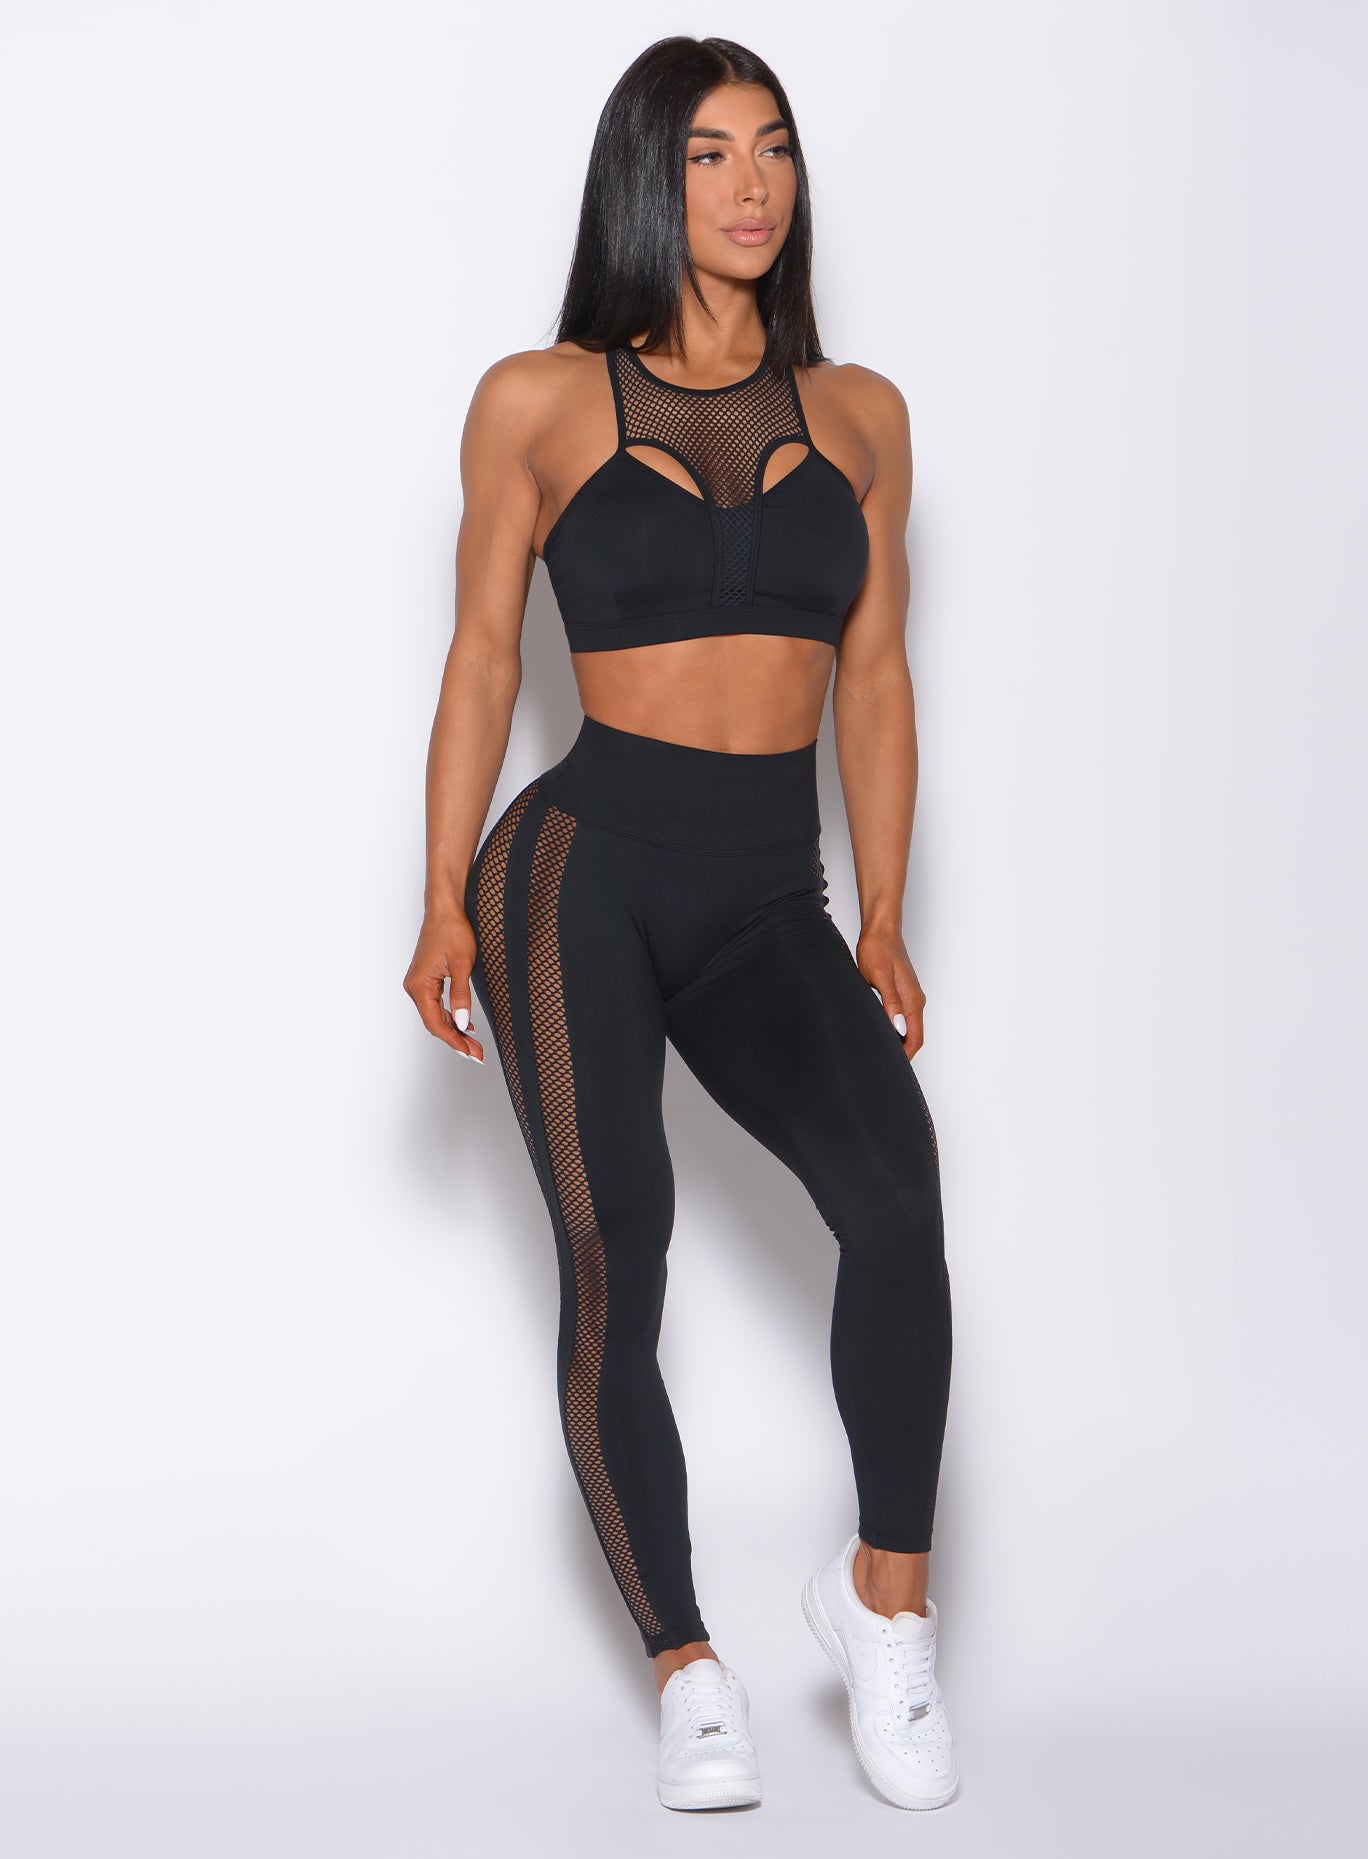 Model facing forward wearing our black mohawk leggings and a matching sports bra 